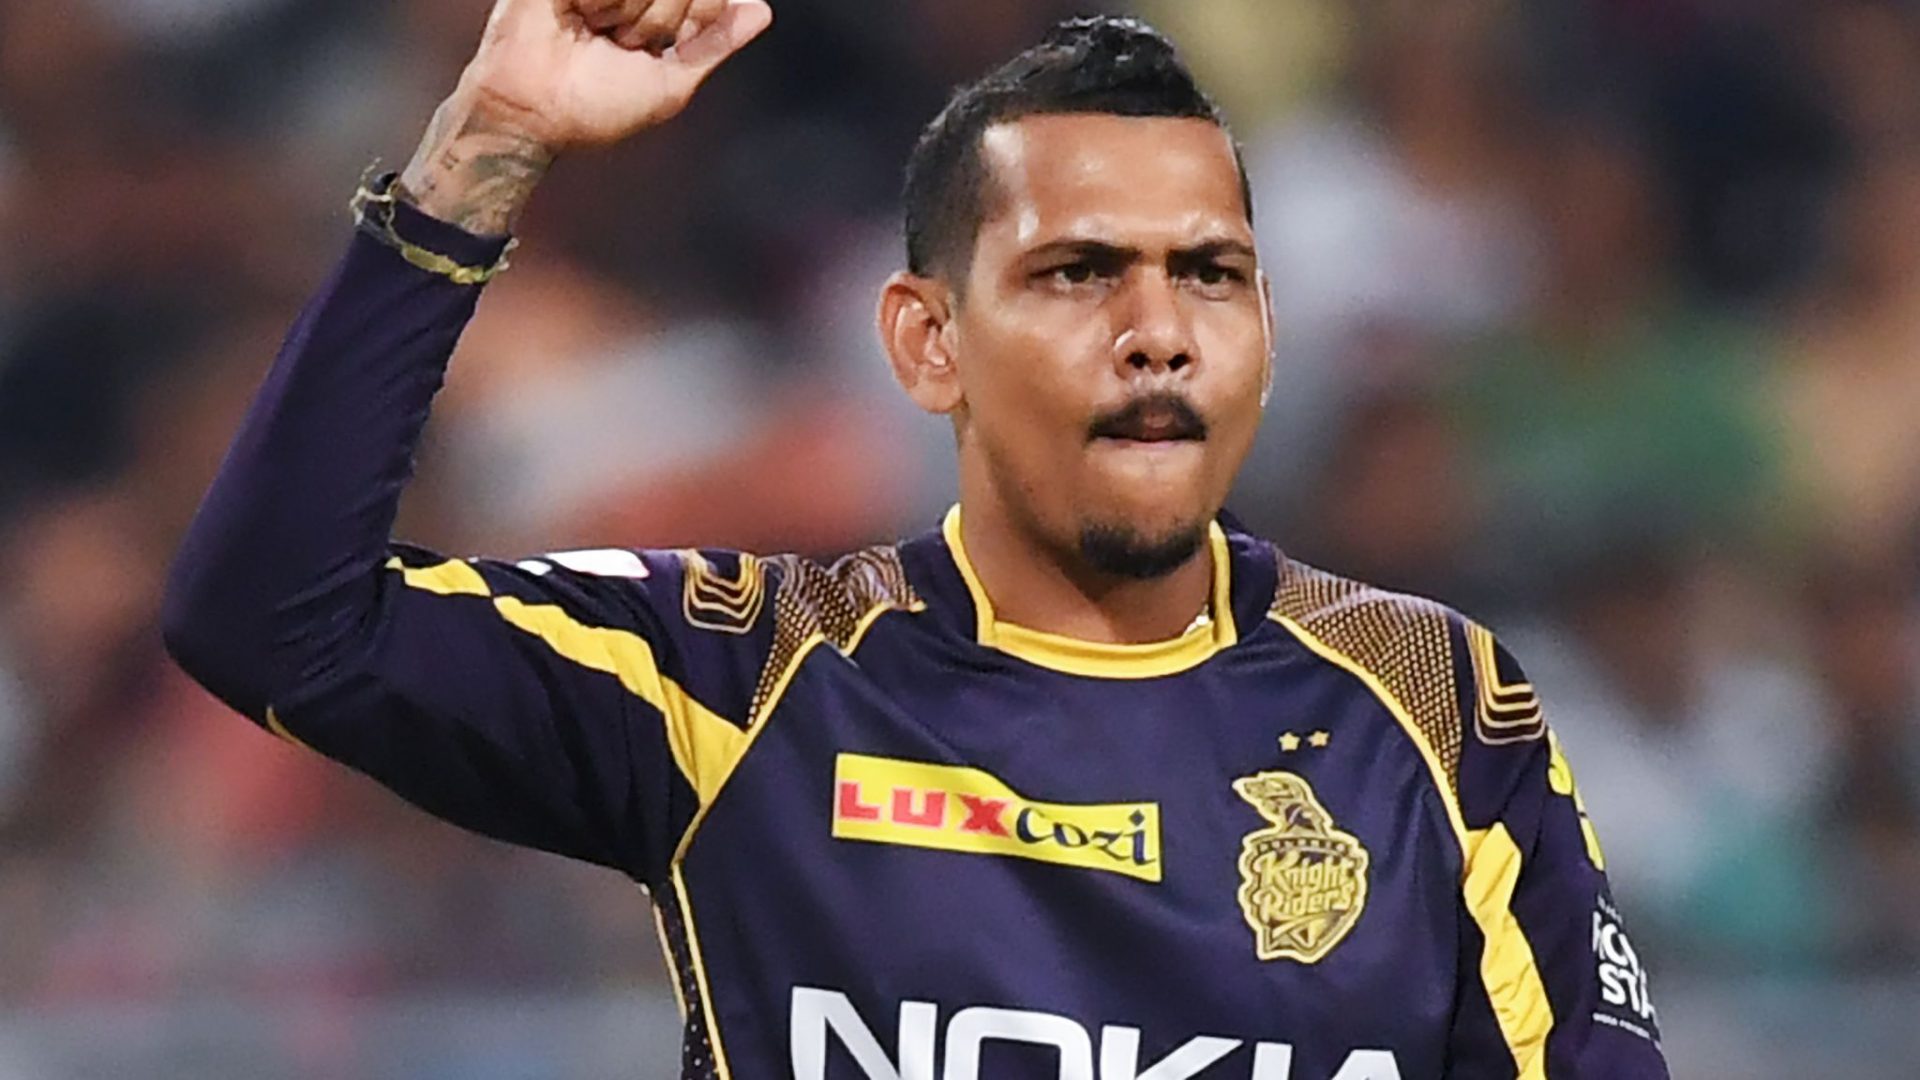 Sunil Narine biography, Age, Height, Family, Bowling Speed, IPL Career